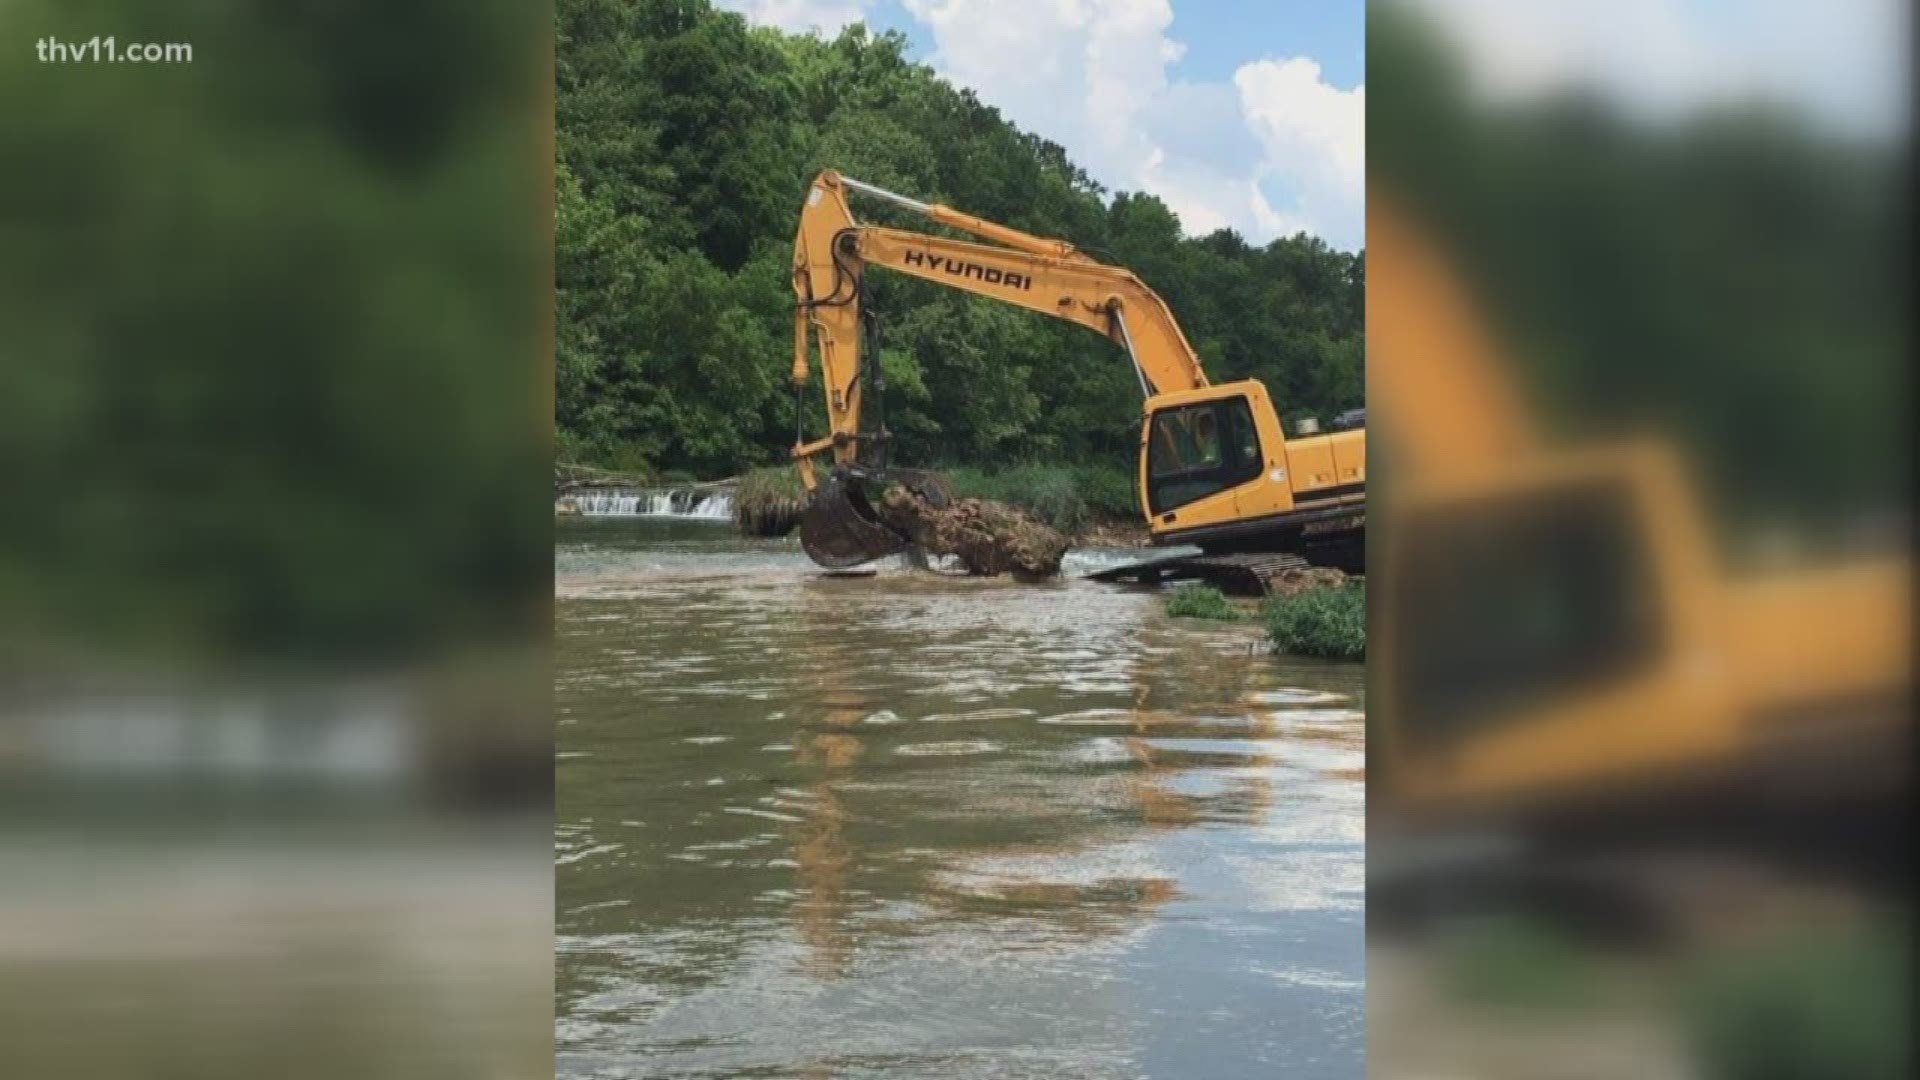 State and Fulton County officials announced that they have closed the sinkhole that killed a man last month on the Spring River.